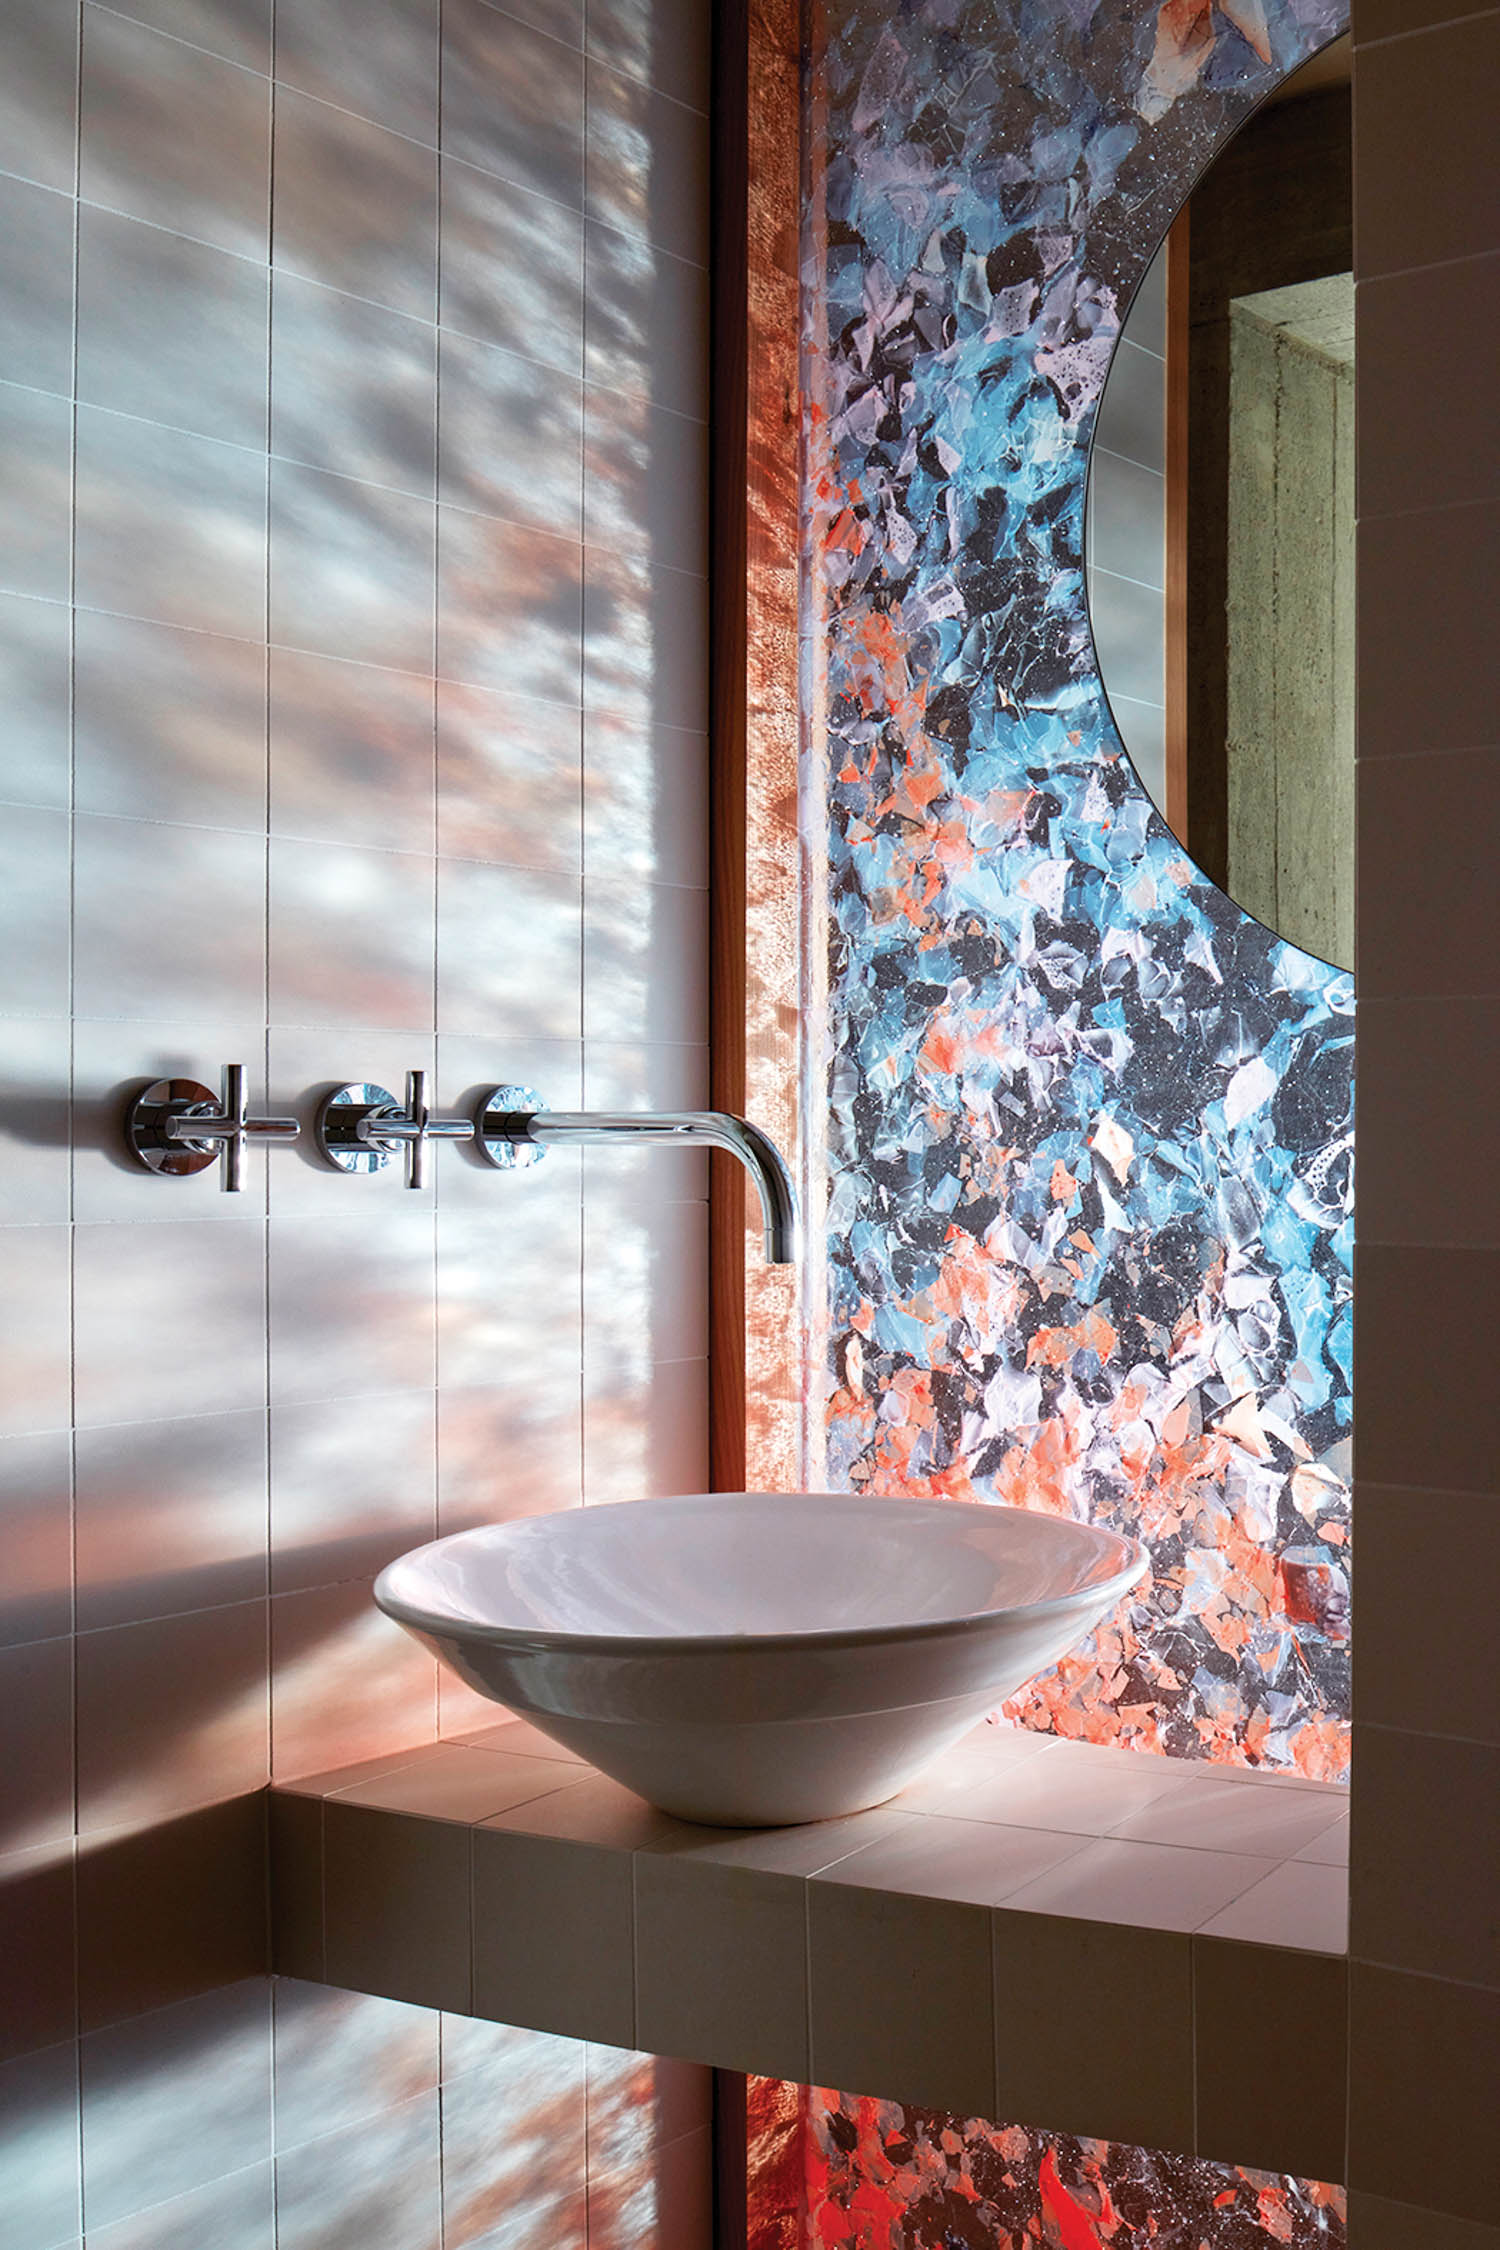 light filters into a stained glass window in a home bathroom